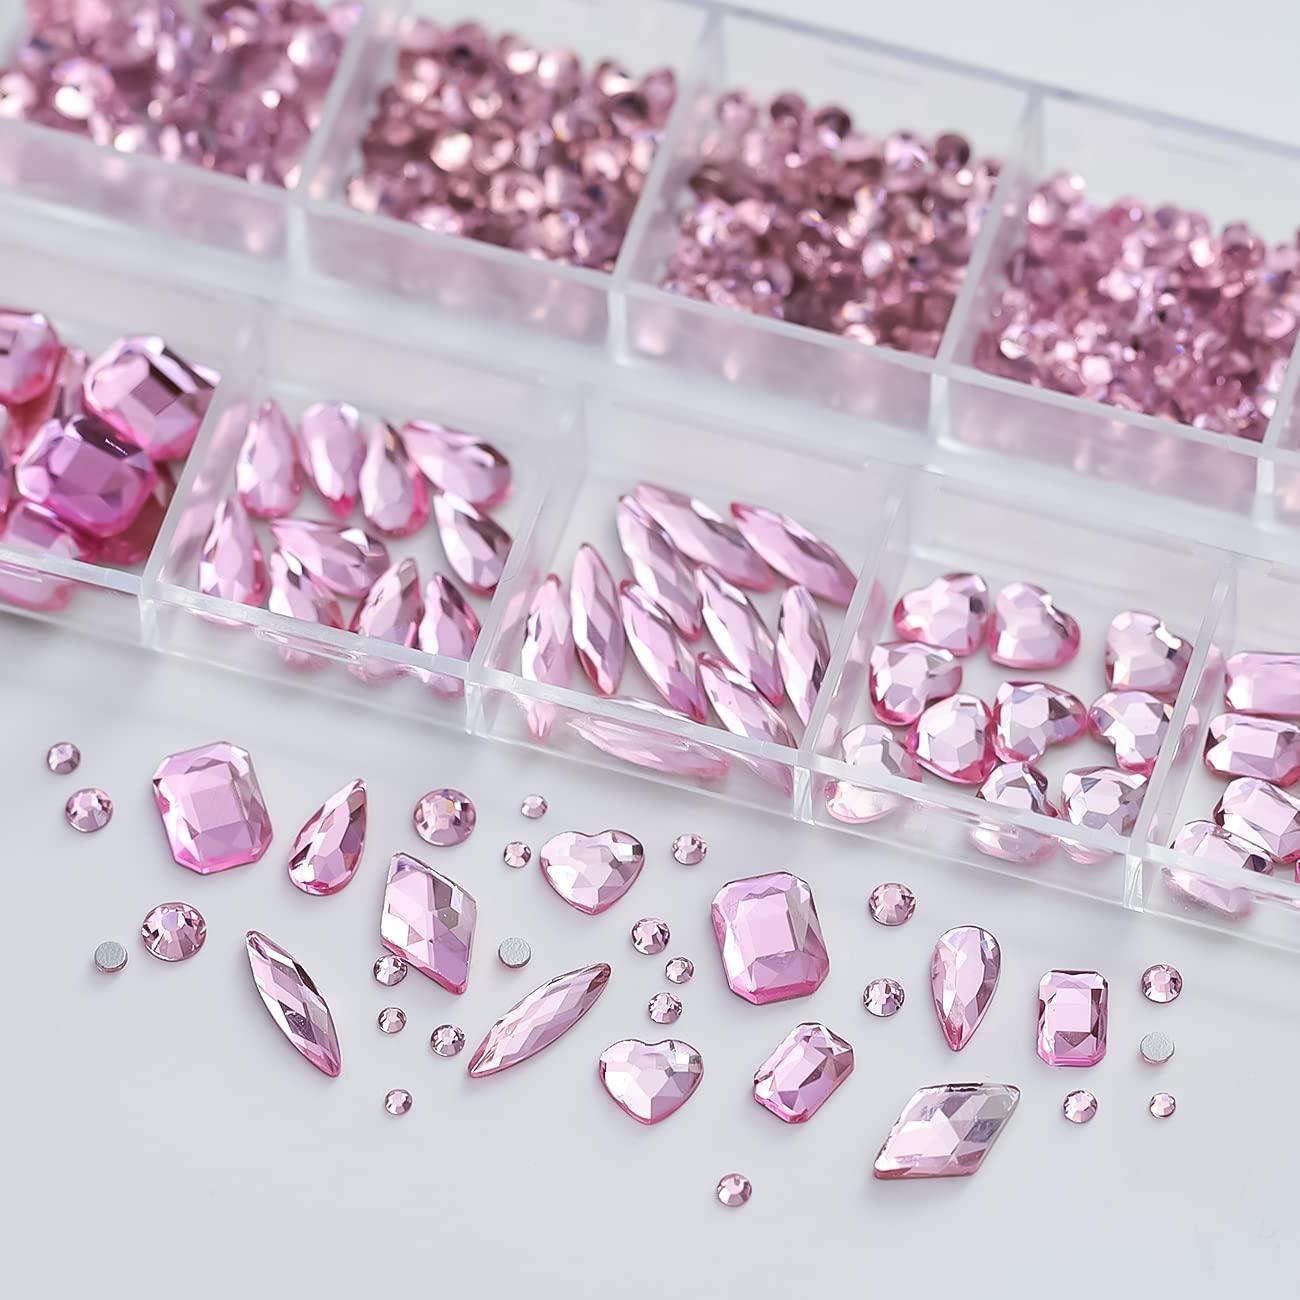 BELICEY Pink Crystal Nail Rhinestones Round Beads Flatback Shiny AB Glass  Gems Stones Multi Shapes Sizes Gold Rhinestones Nail Crystals for Nail DIY